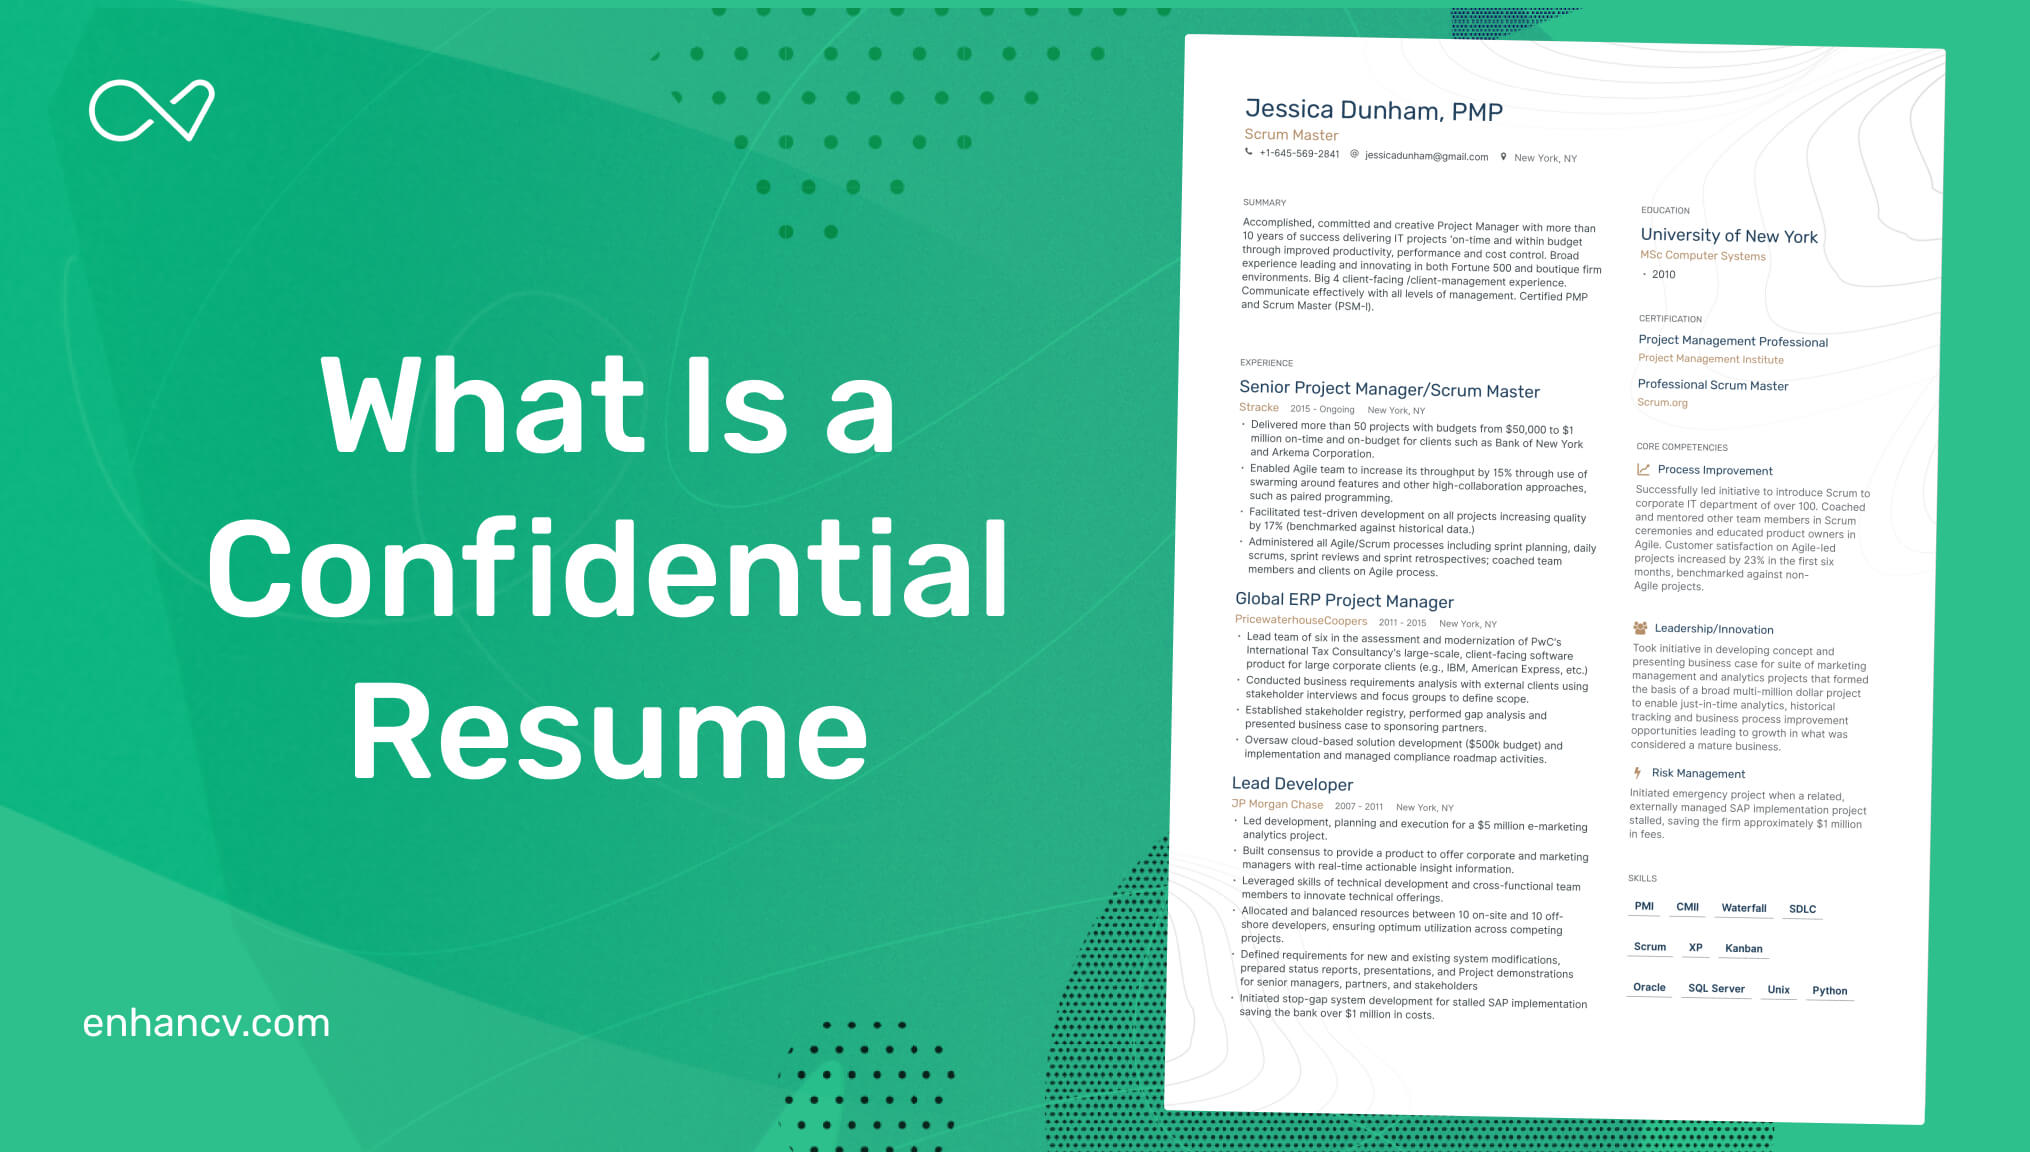 What Is a Confidential Resume and How to Write One